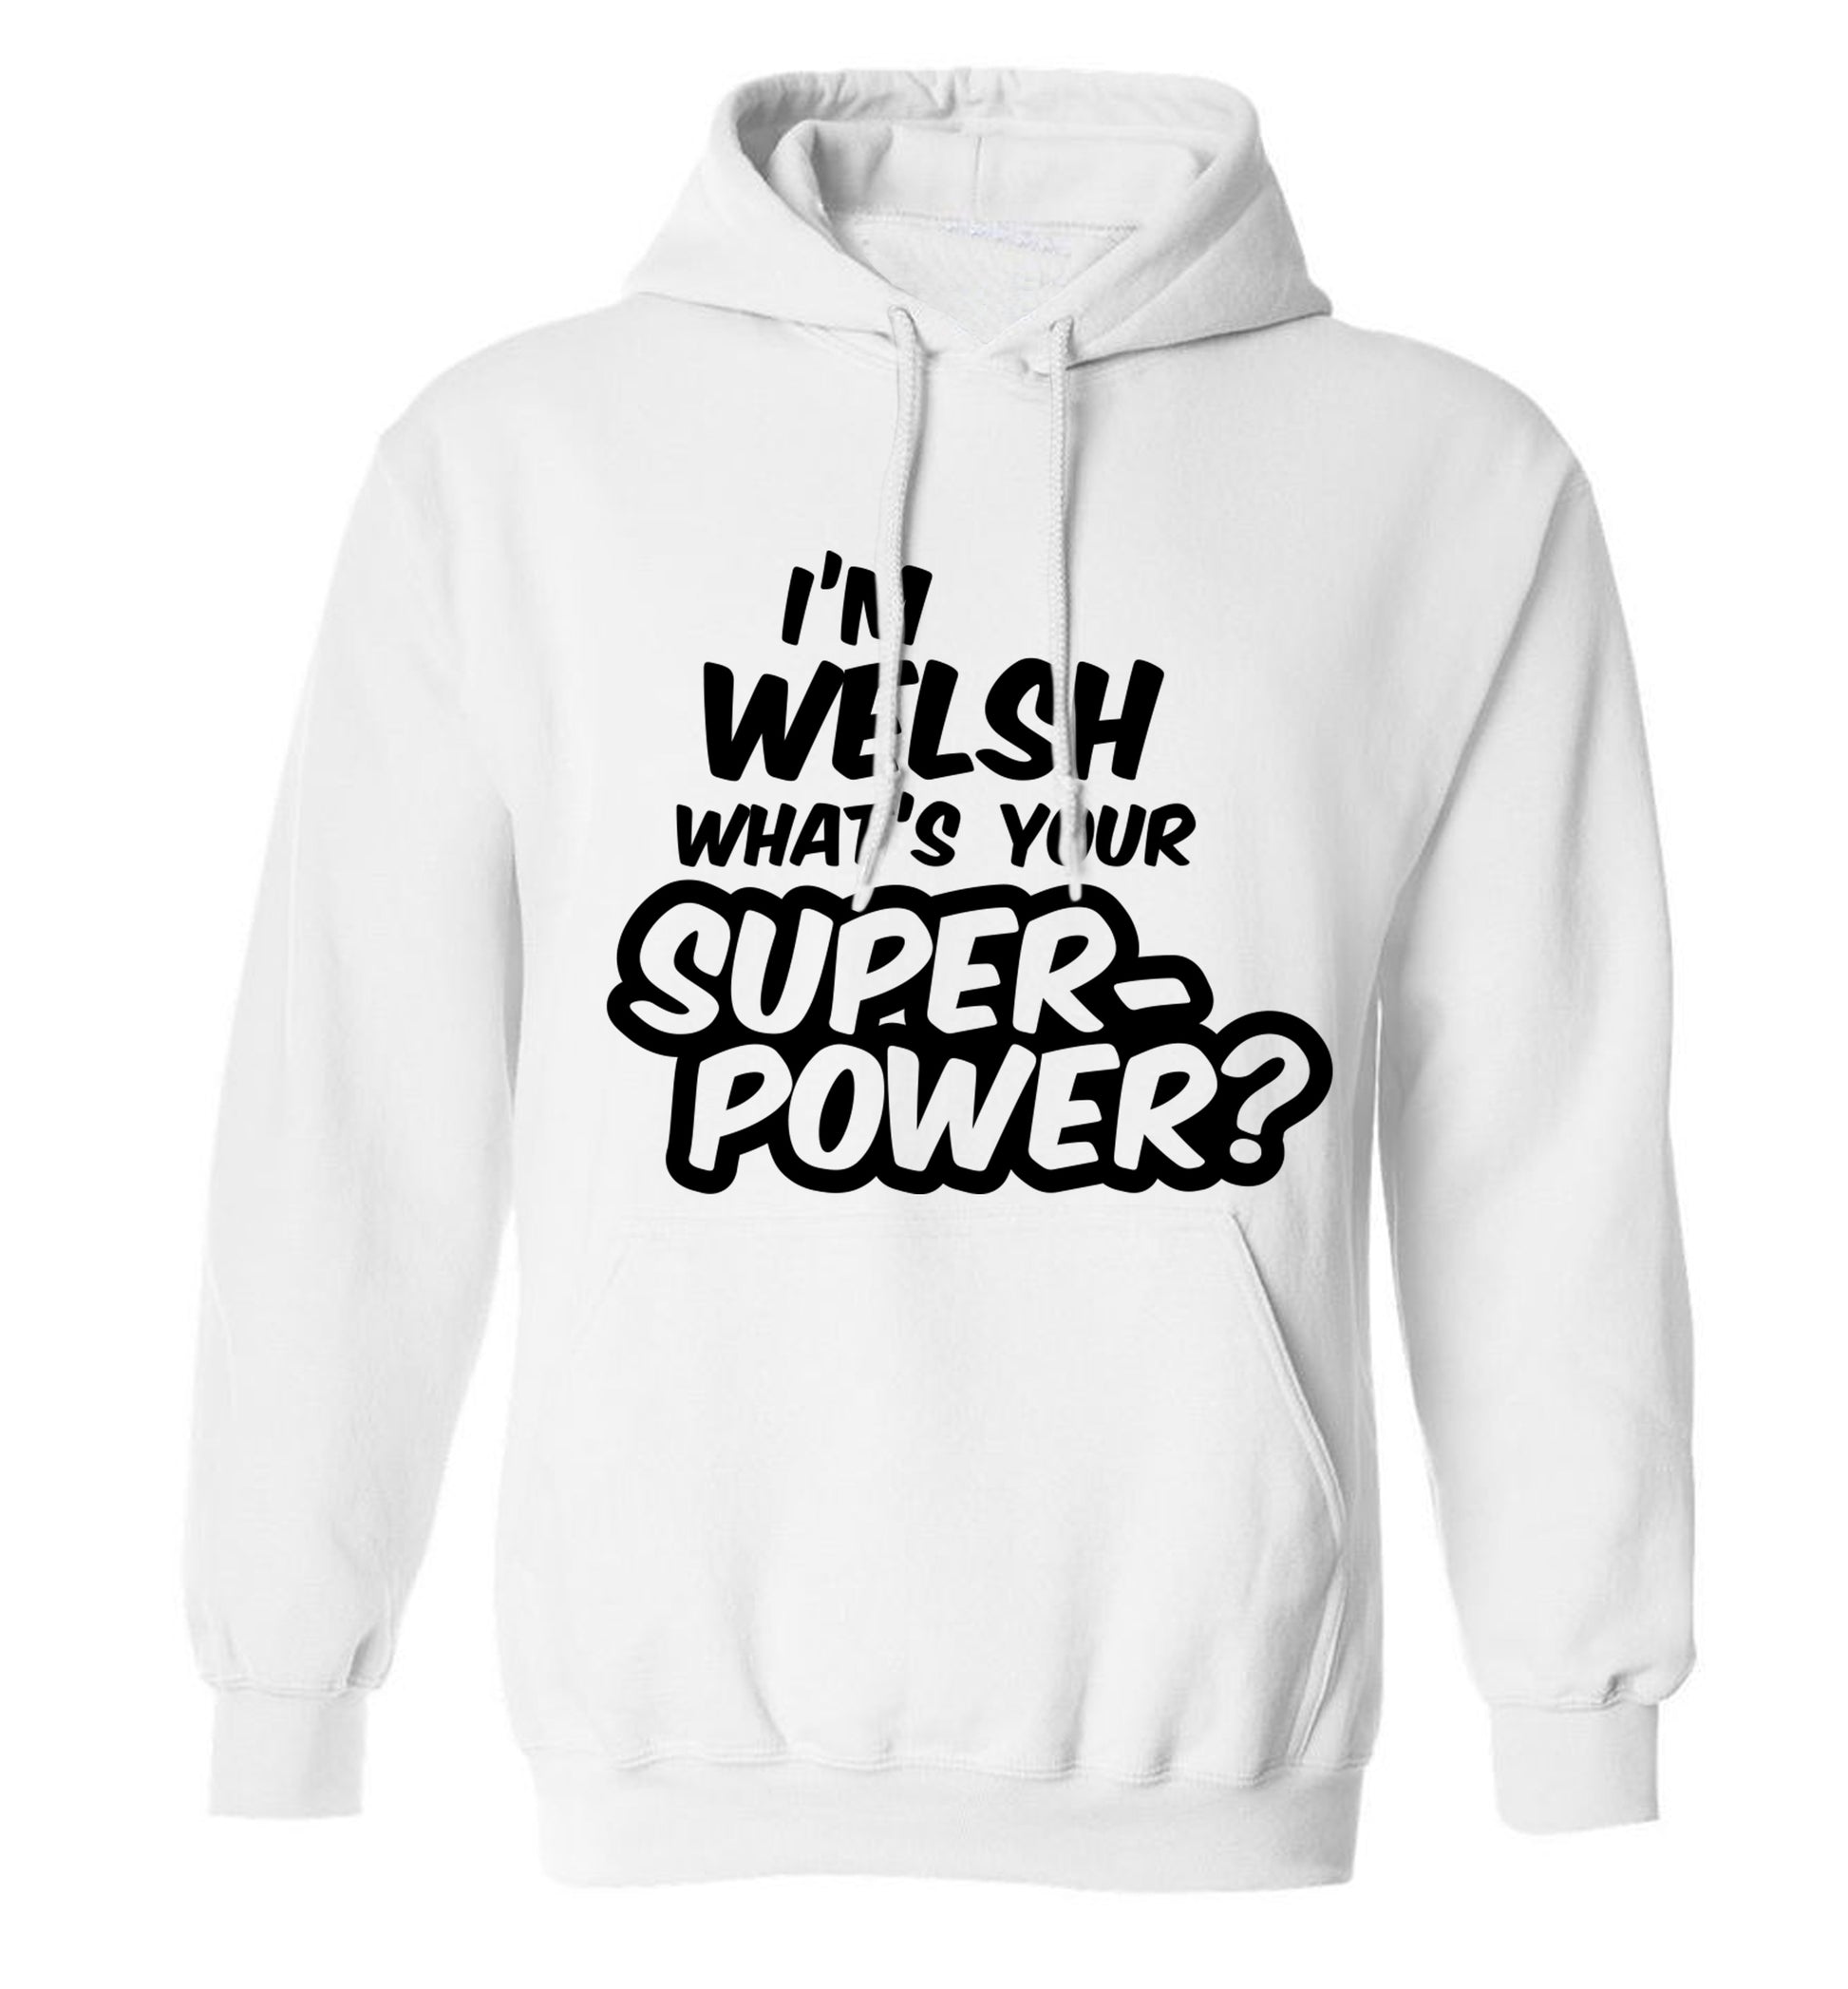 I'm Welsh what's your superpower? adults unisex white hoodie 2XL